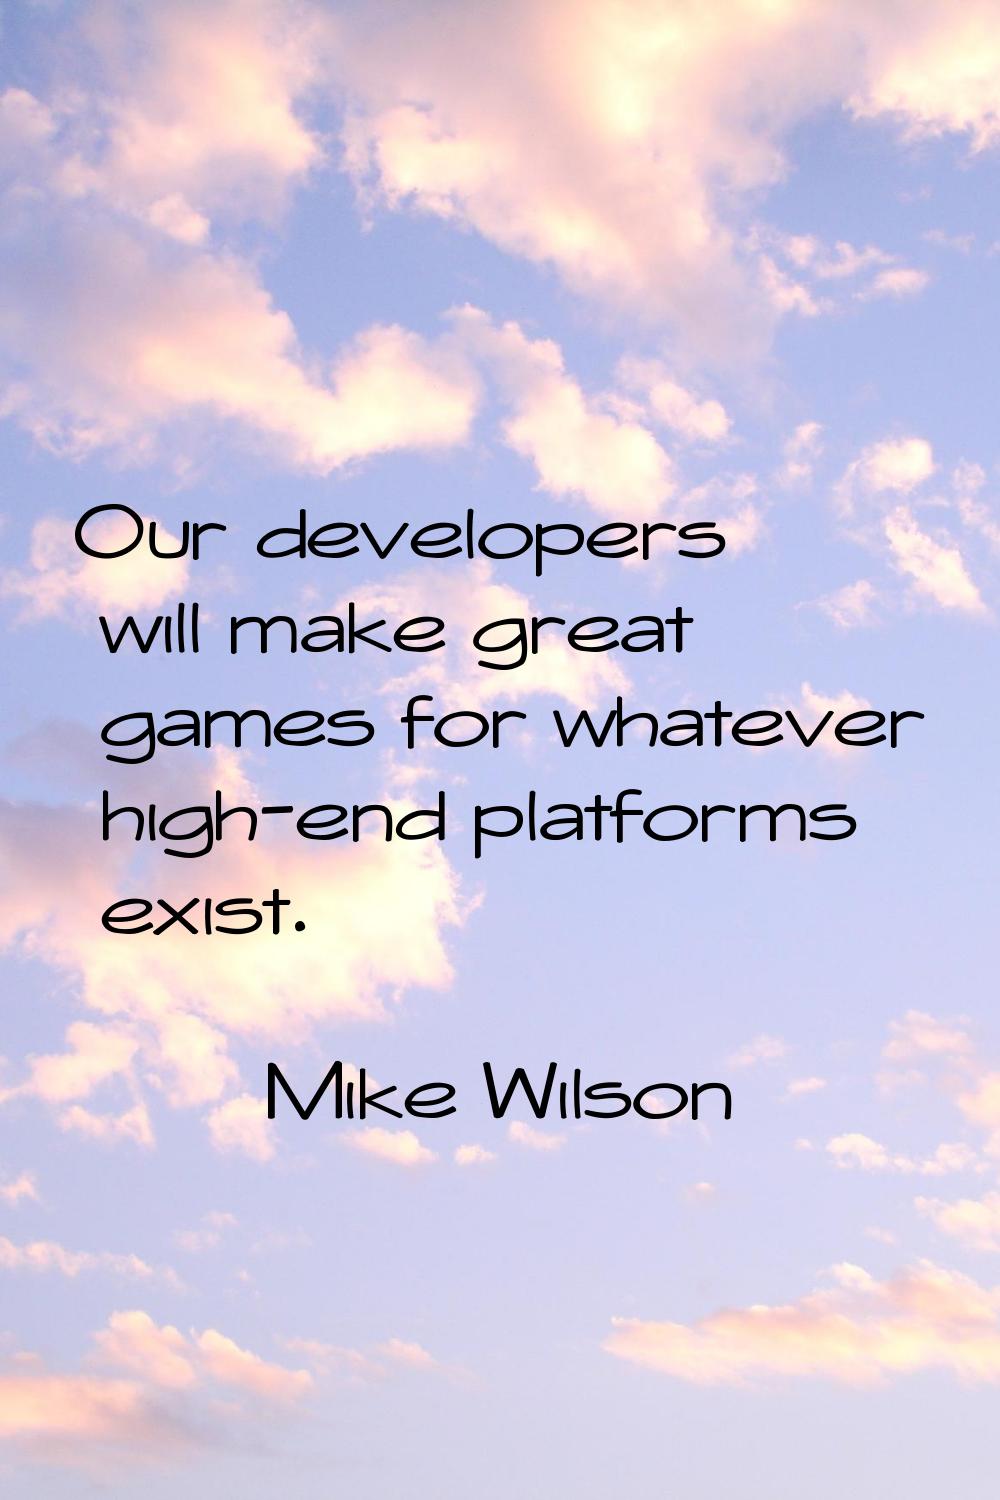 Our developers will make great games for whatever high-end platforms exist.